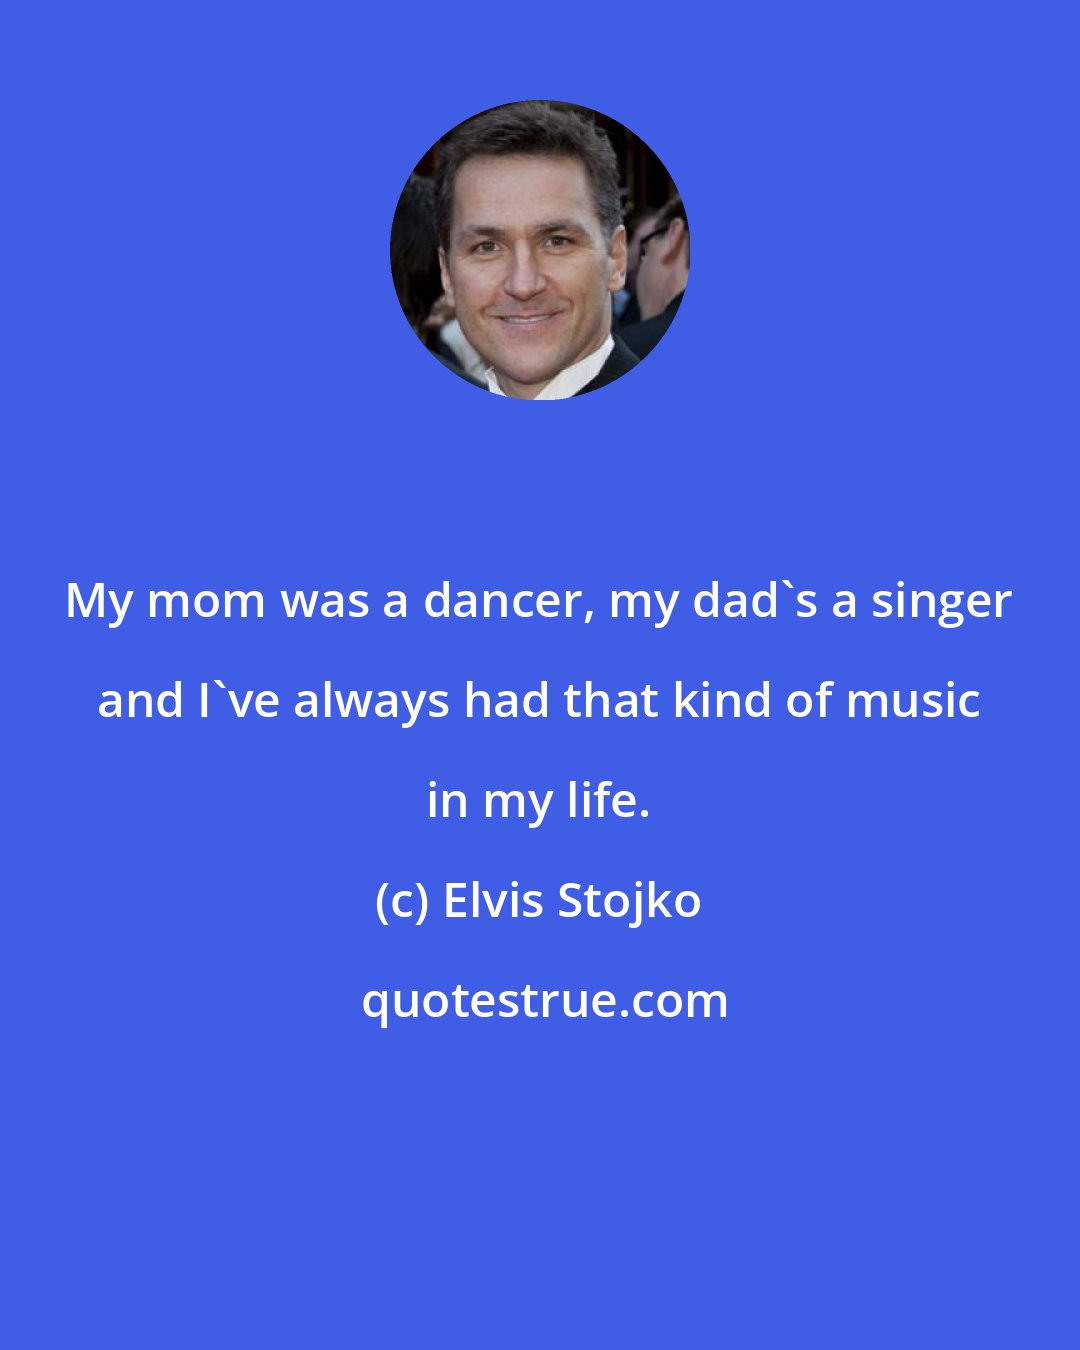 Elvis Stojko: My mom was a dancer, my dad's a singer and I've always had that kind of music in my life.